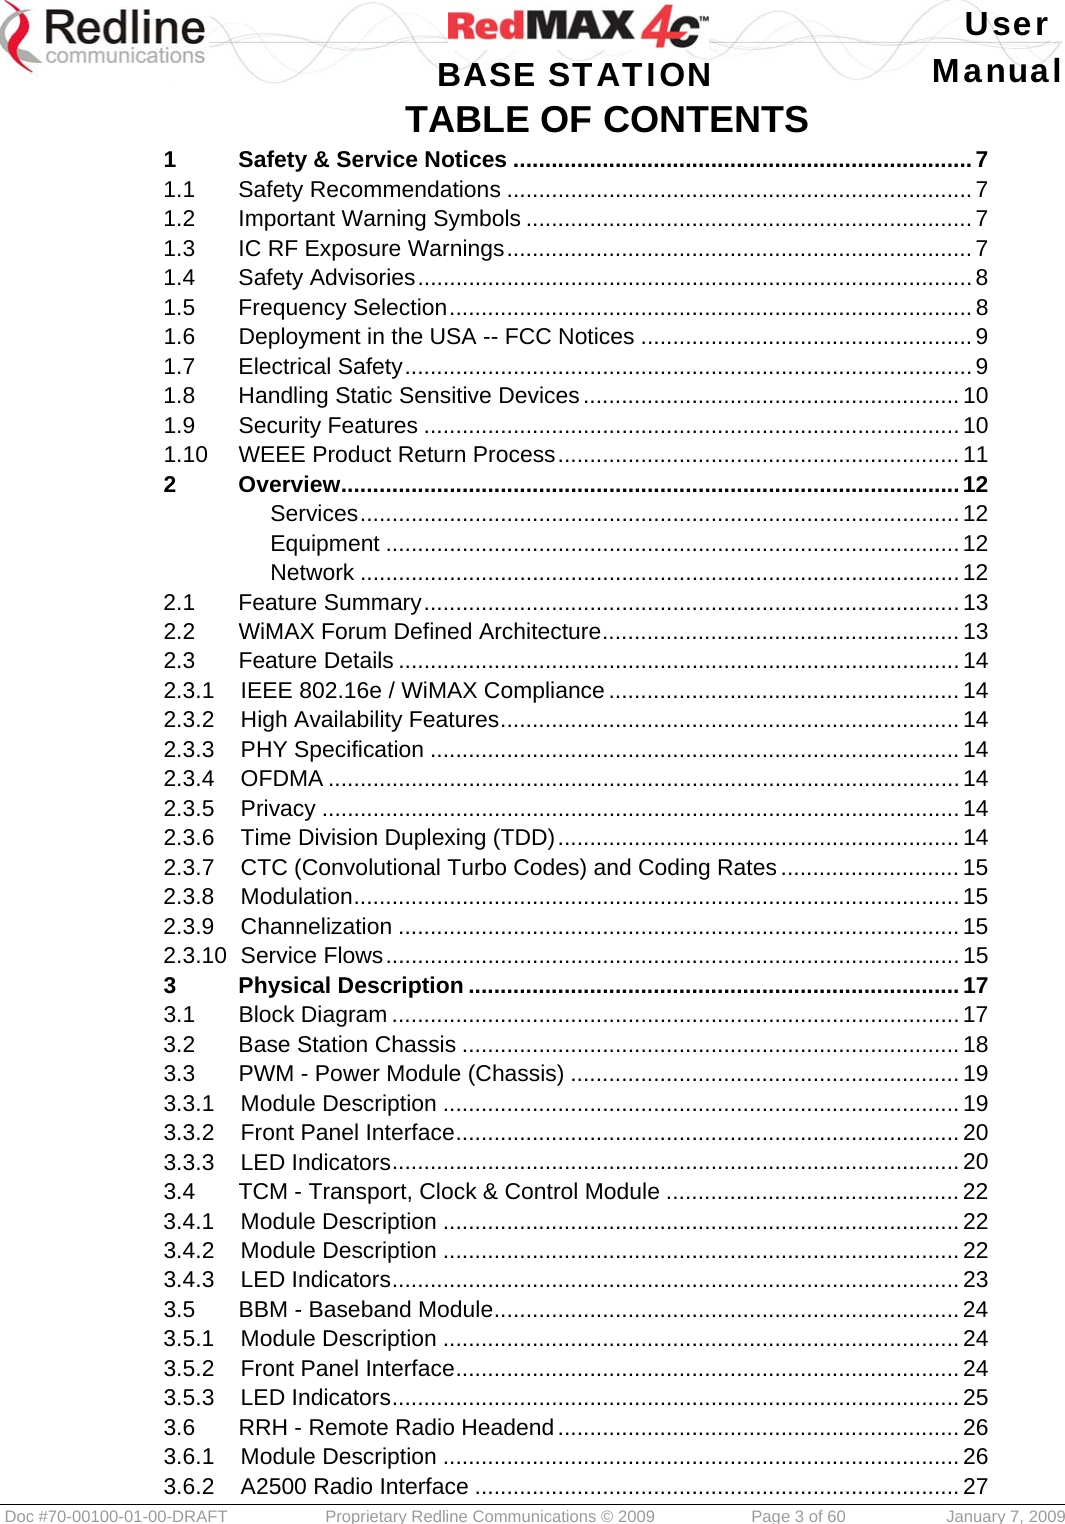   User  BASE STATION Manual  Doc #70-00100-01-00-DRAFT  Proprietary Redline Communications © 2009   Page 3 of 60  January 7, 2009 TABLE OF CONTENTS 1Safety &amp; Service Notices ........................................................................ 71.1Safety Recommendations ......................................................................... 71.2Important Warning Symbols ...................................................................... 71.3IC RF Exposure Warnings ......................................................................... 71.4Safety Advisories ....................................................................................... 81.5Frequency Selection .................................................................................. 81.6Deployment in the USA -- FCC Notices .................................................... 91.7Electrical Safety ......................................................................................... 91.8Handling Static Sensitive Devices ........................................................... 101.9Security Features .................................................................................... 101.10WEEE Product Return Process ............................................................... 112Overview ................................................................................................. 12Services ..............................................................................................  12Equipment .......................................................................................... 12Network .............................................................................................. 122.1Feature Summary .................................................................................... 132.2WiMAX Forum Defined Architecture ........................................................ 132.3Feature Details ........................................................................................ 142.3.1IEEE 802.16e / WiMAX Compliance ....................................................... 142.3.2High Availability Features ........................................................................ 142.3.3PHY Specification ................................................................................... 142.3.4OFDMA ................................................................................................... 142.3.5Privacy .................................................................................................... 142.3.6Time Division Duplexing (TDD) ............................................................... 142.3.7CTC (Convolutional Turbo Codes) and Coding Rates ............................ 152.3.8Modulation ............................................................................................... 152.3.9Channelization ........................................................................................ 152.3.10Service Flows .......................................................................................... 153Physical Description ............................................................................. 173.1Block Diagram ......................................................................................... 173.2Base Station Chassis .............................................................................. 183.3PWM - Power Module (Chassis) ............................................................. 193.3.1Module Description ................................................................................. 193.3.2Front Panel Interface ............................................................................... 203.3.3LED Indicators ......................................................................................... 203.4TCM - Transport, Clock &amp; Control Module .............................................. 223.4.1Module Description ................................................................................. 223.4.2Module Description ................................................................................. 223.4.3LED Indicators ......................................................................................... 233.5BBM - Baseband Module ......................................................................... 243.5.1Module Description ................................................................................. 243.5.2Front Panel Interface ............................................................................... 243.5.3LED Indicators ......................................................................................... 253.6RRH - Remote Radio Headend ............................................................... 263.6.1Module Description ................................................................................. 263.6.2A2500 Radio Interface ............................................................................ 27